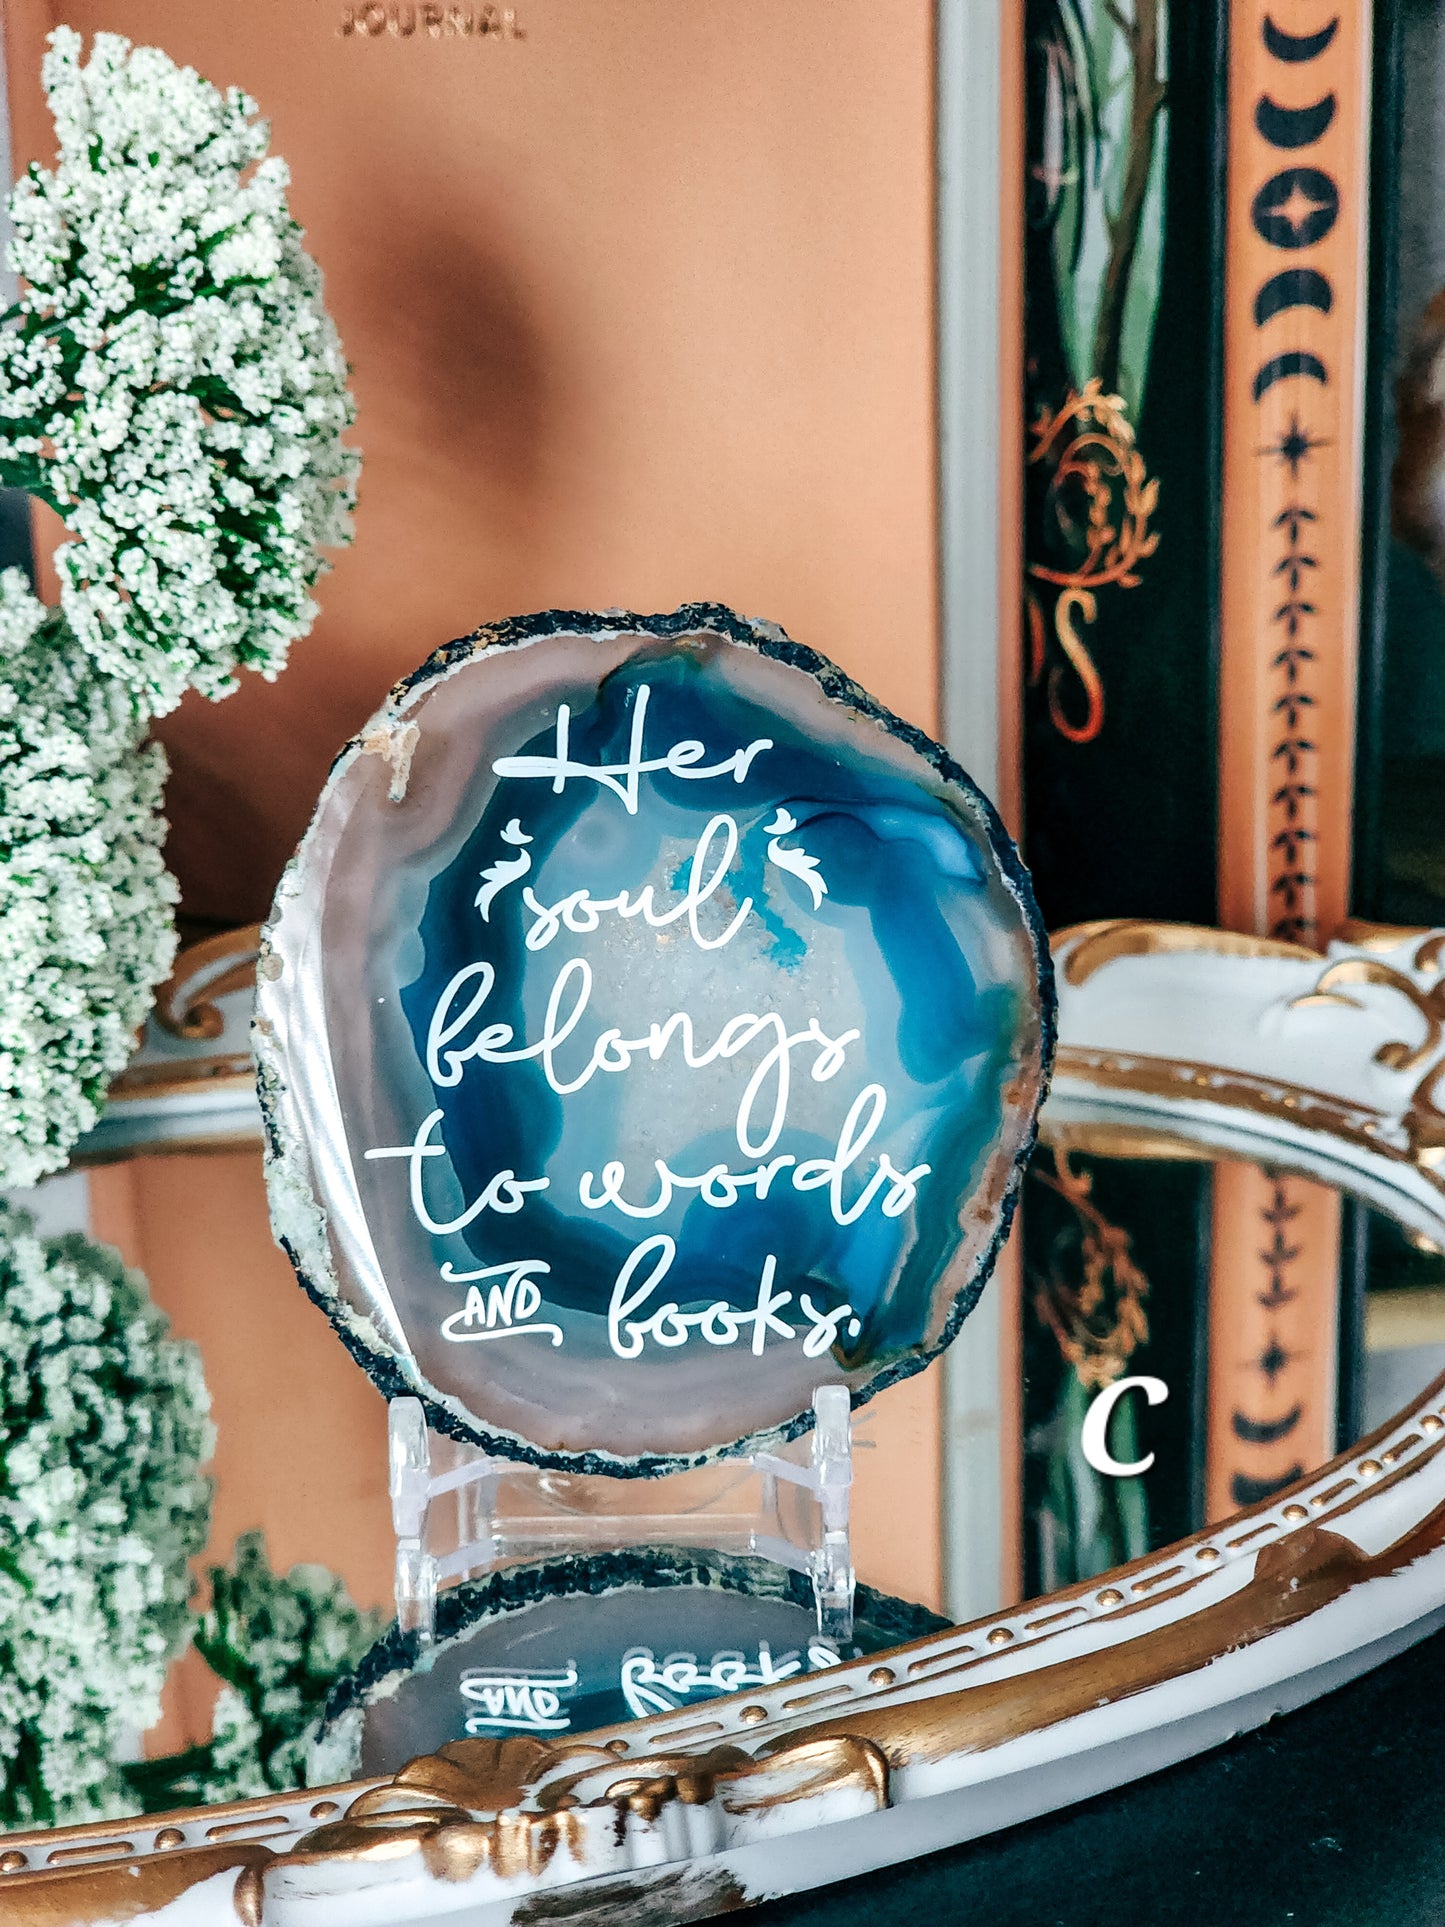 Her Soul belongs to words and books | Blue Agate Slice Shelf Sitter